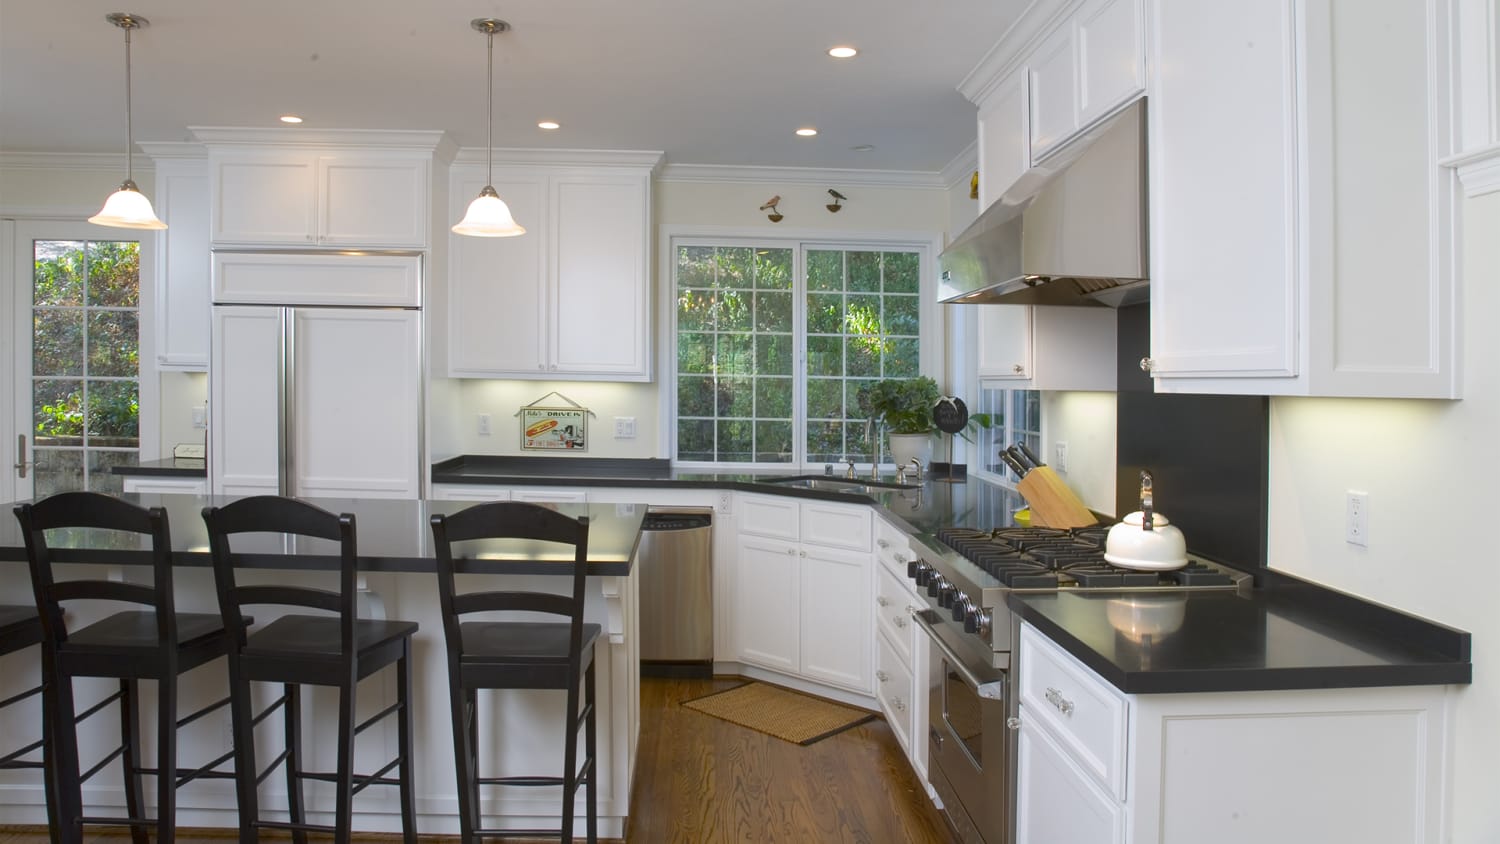 This Popular Kitchen Color Can Actually Hurt a Home's Sale Price